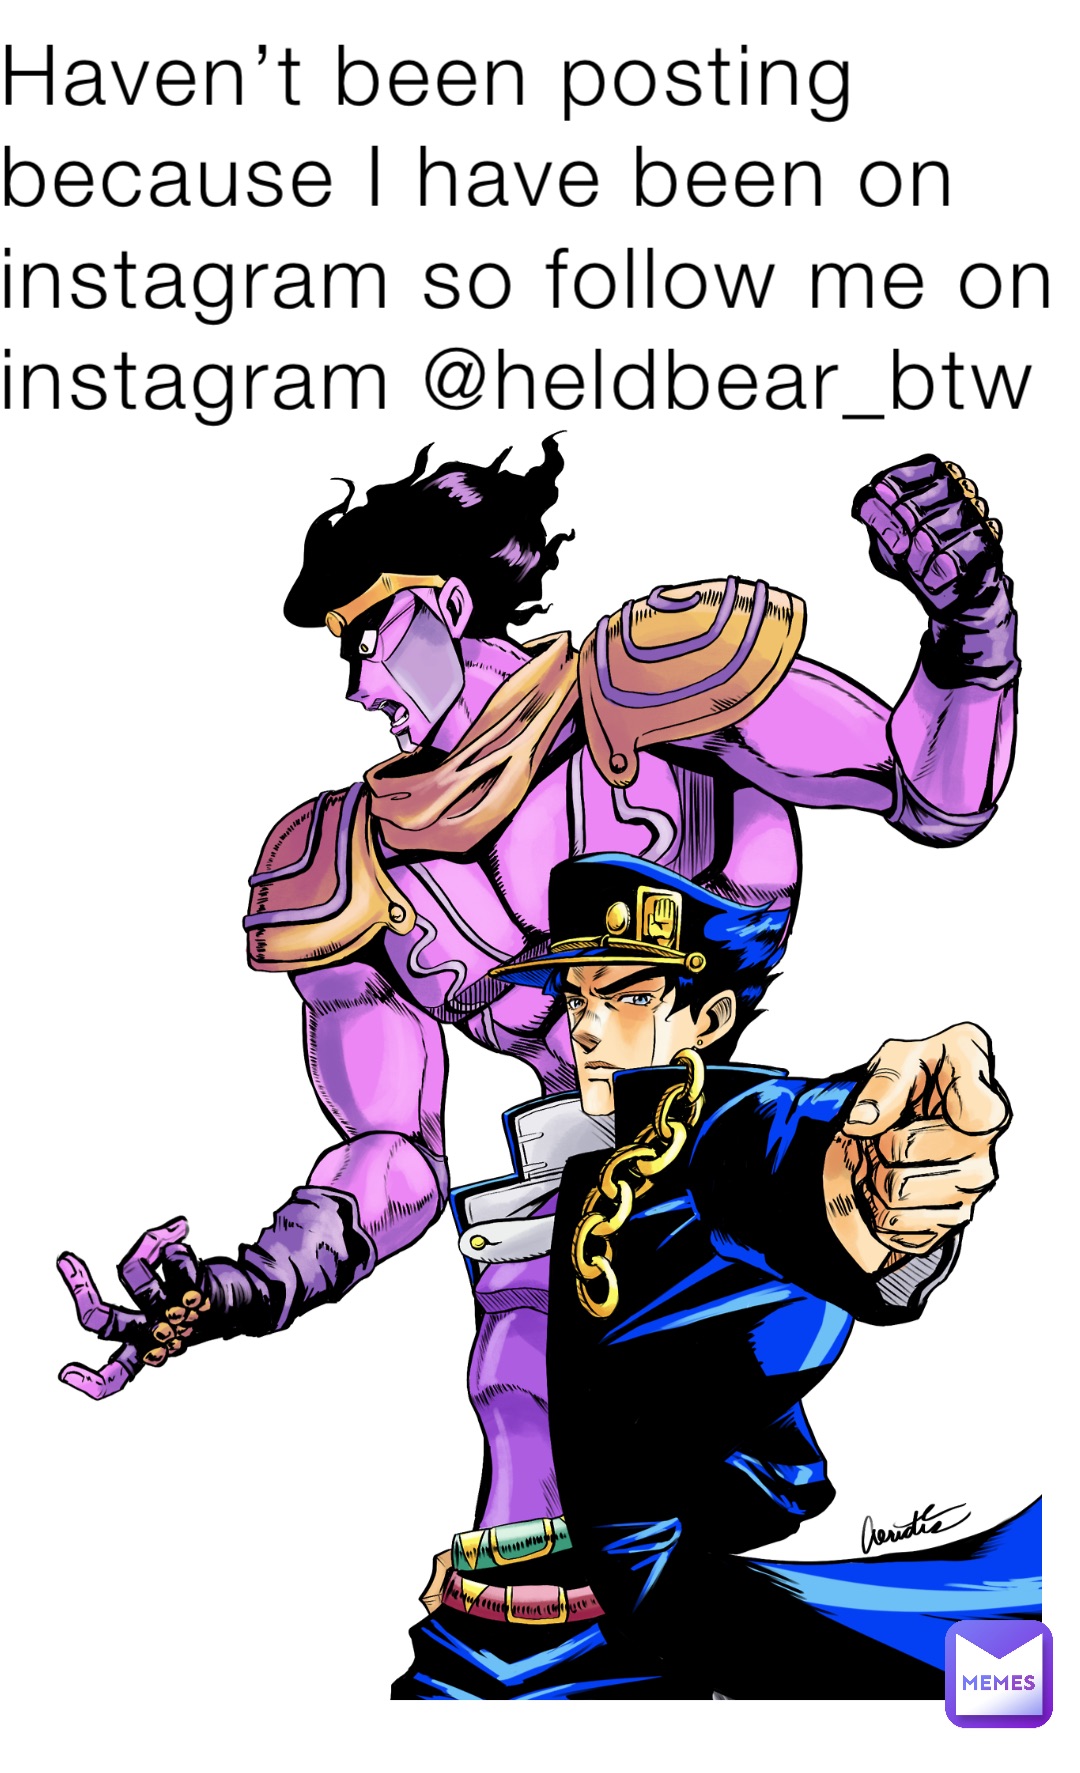 Haven’t been posting because I have been on instagram so follow me on instagram @heldbear_btw Haven’t Ben posting because I have been on instagram so follow me on instagram @heldbear_btw